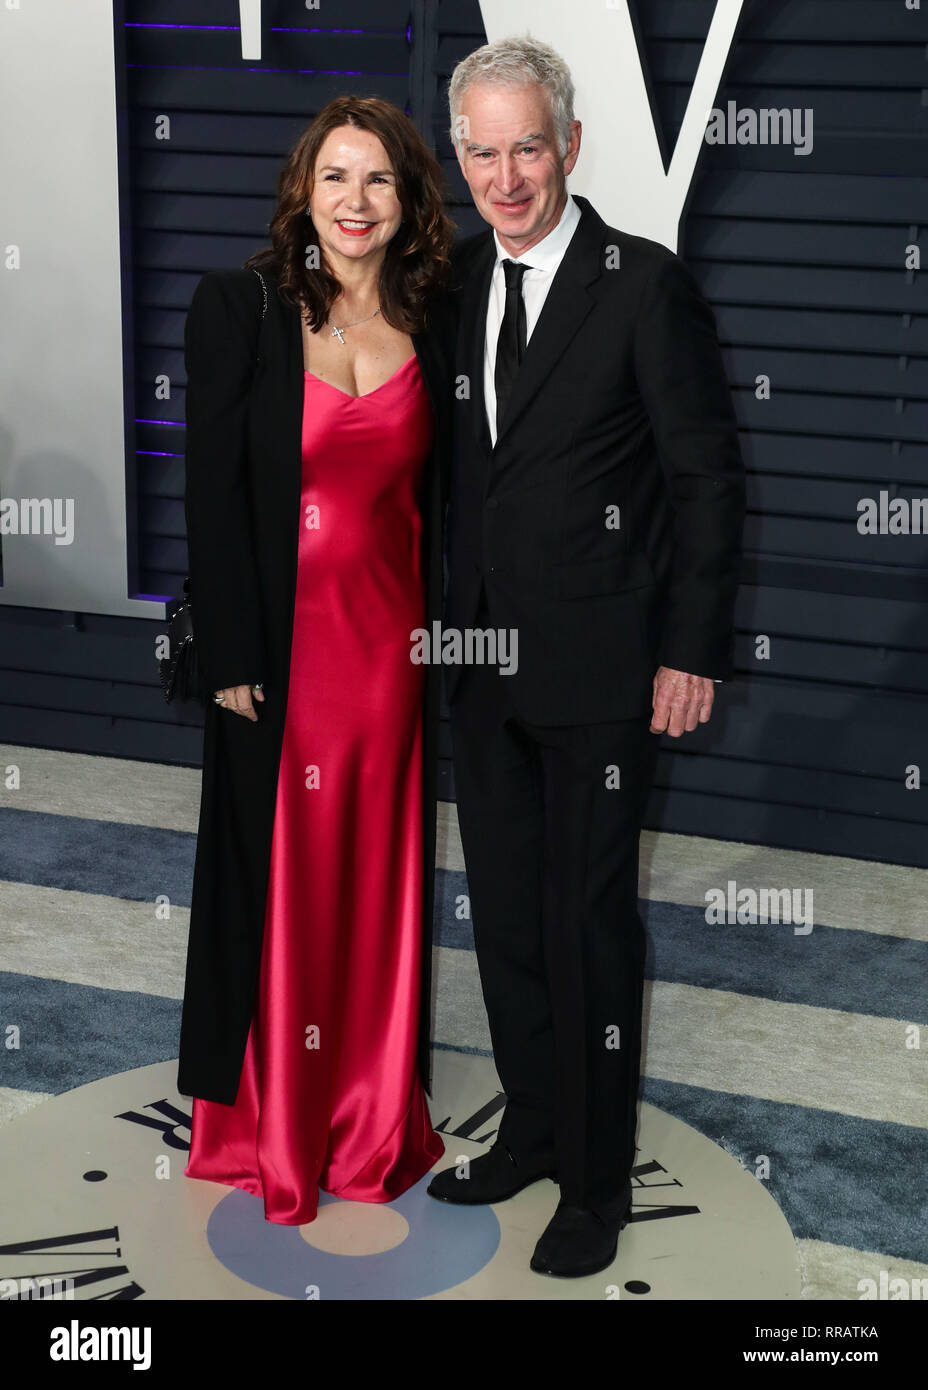 BEVERLY HILLS, LOS ANGELES, CA, USA - FEBRUARY 24: Patty Smyth and John McEnroe arrive at the 2019 Vanity Fair Oscar Party held at the Wallis Annenberg Center for the Performing Arts on February 24, 2019 in Beverly Hills, Los Angeles, California, United States. (Photo by Xavier Collin/Image Press Agency) Stock Photo